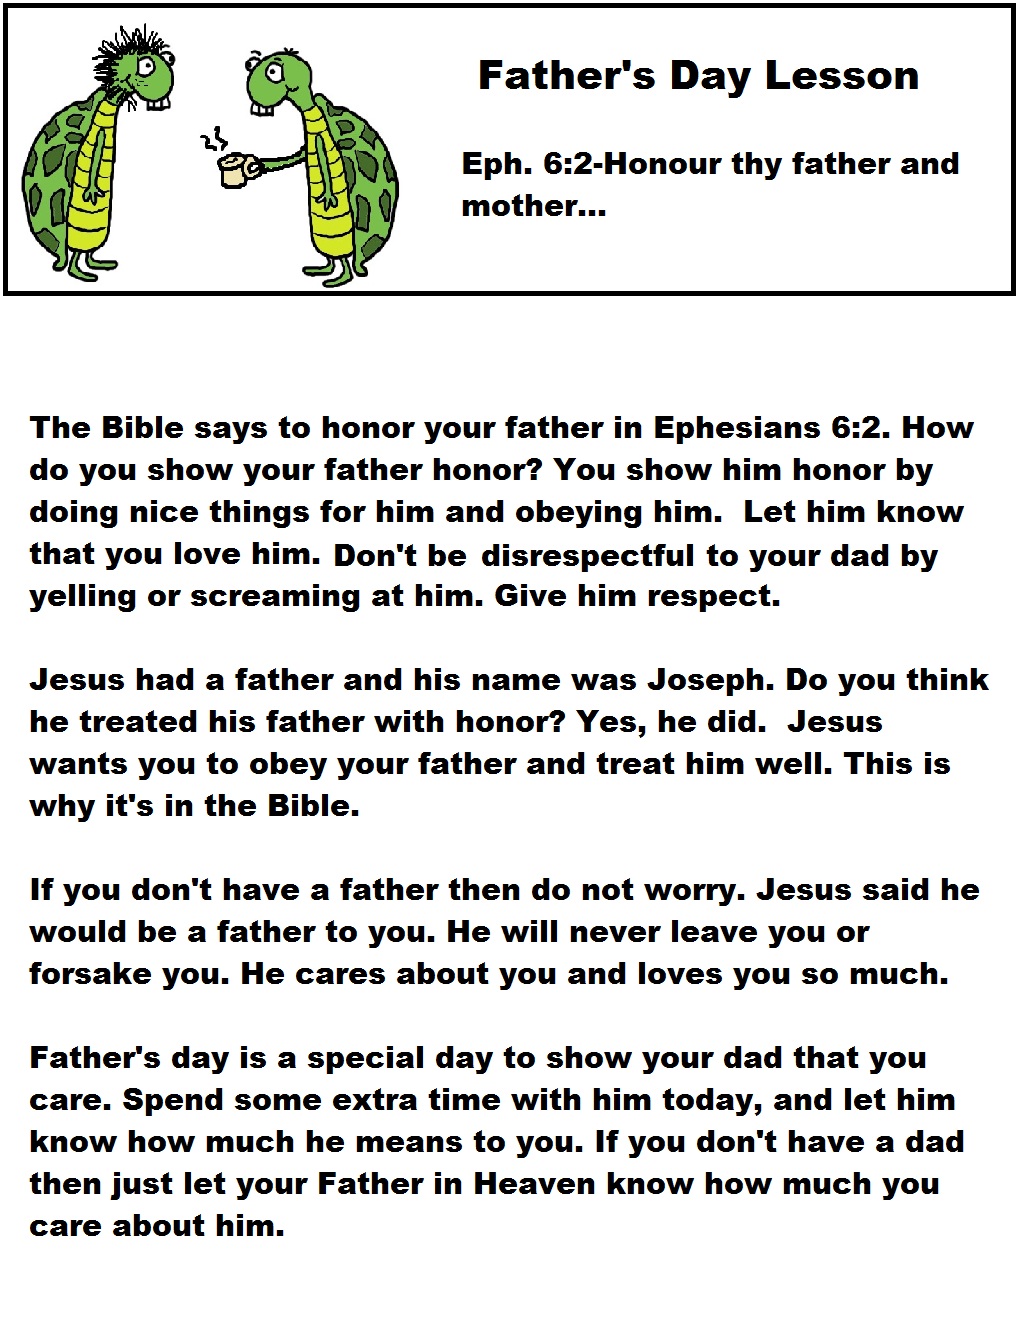 church-house-collection-blog-father-s-day-sunday-school-lesson